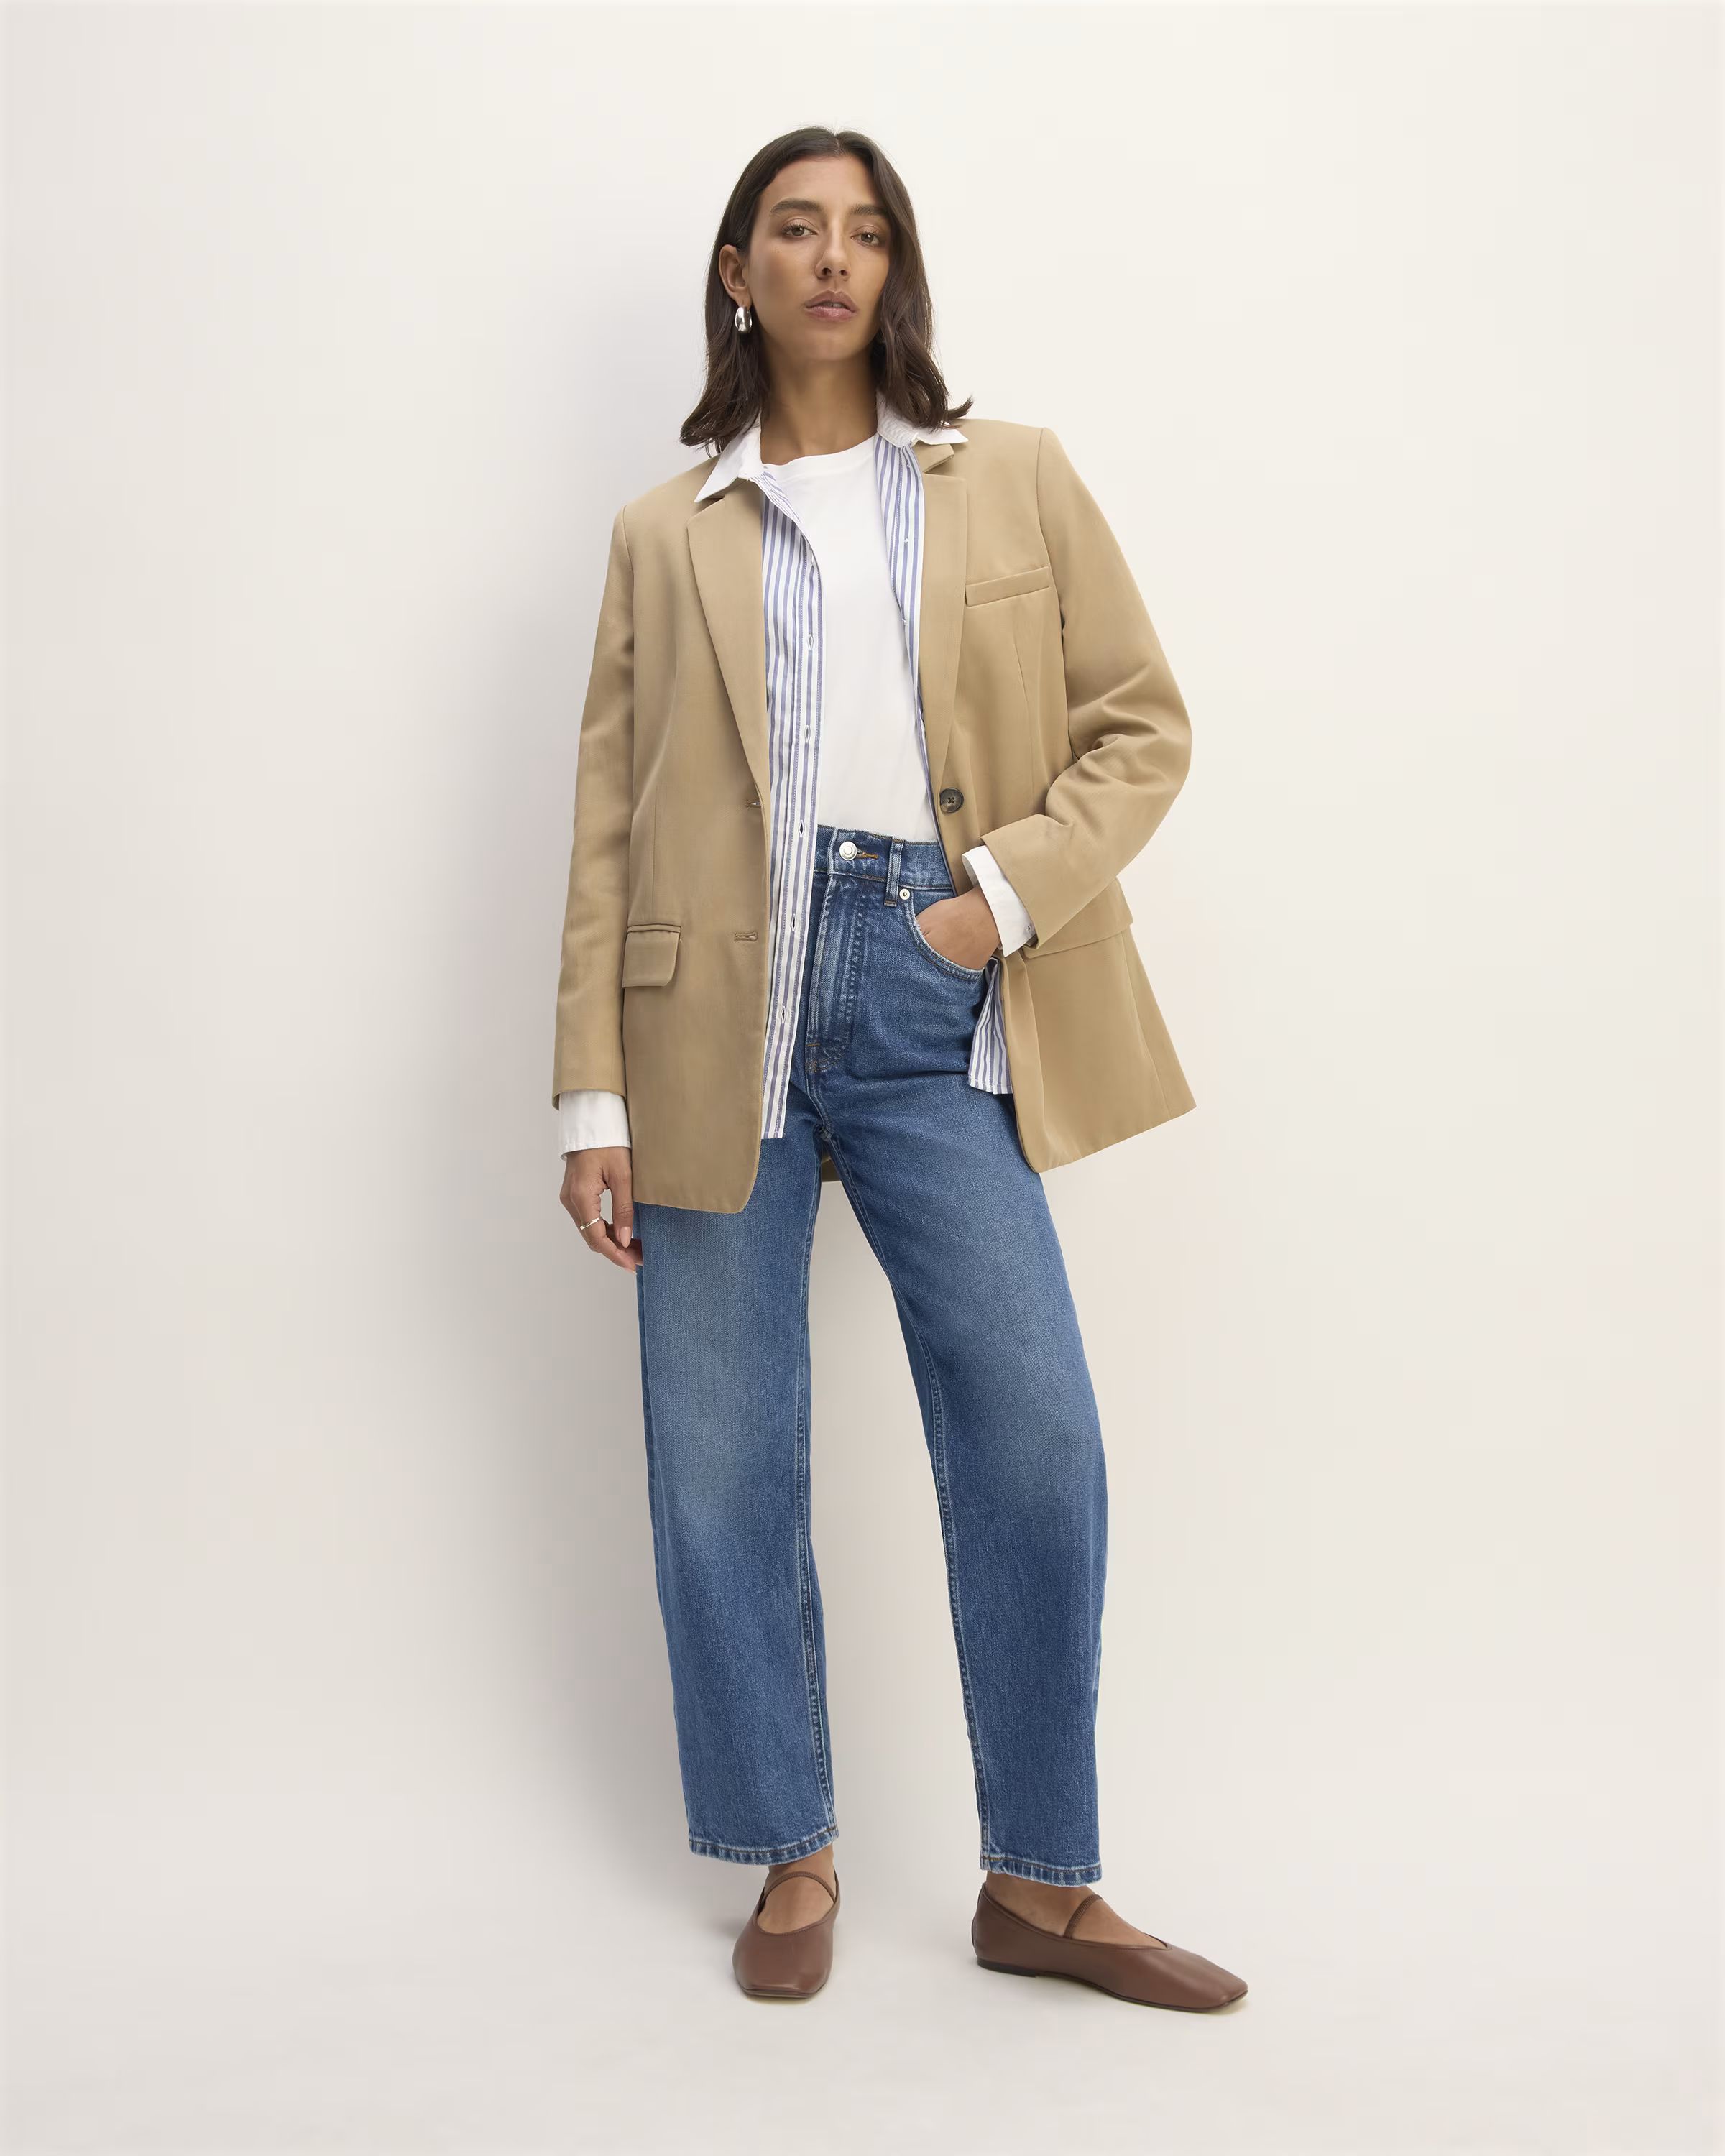 The Way-High® Jean€1404.3 (1528 Reviews)4.3 out of 5 stars. 1528 reviews Hourglass shape? Try ... | Everlane